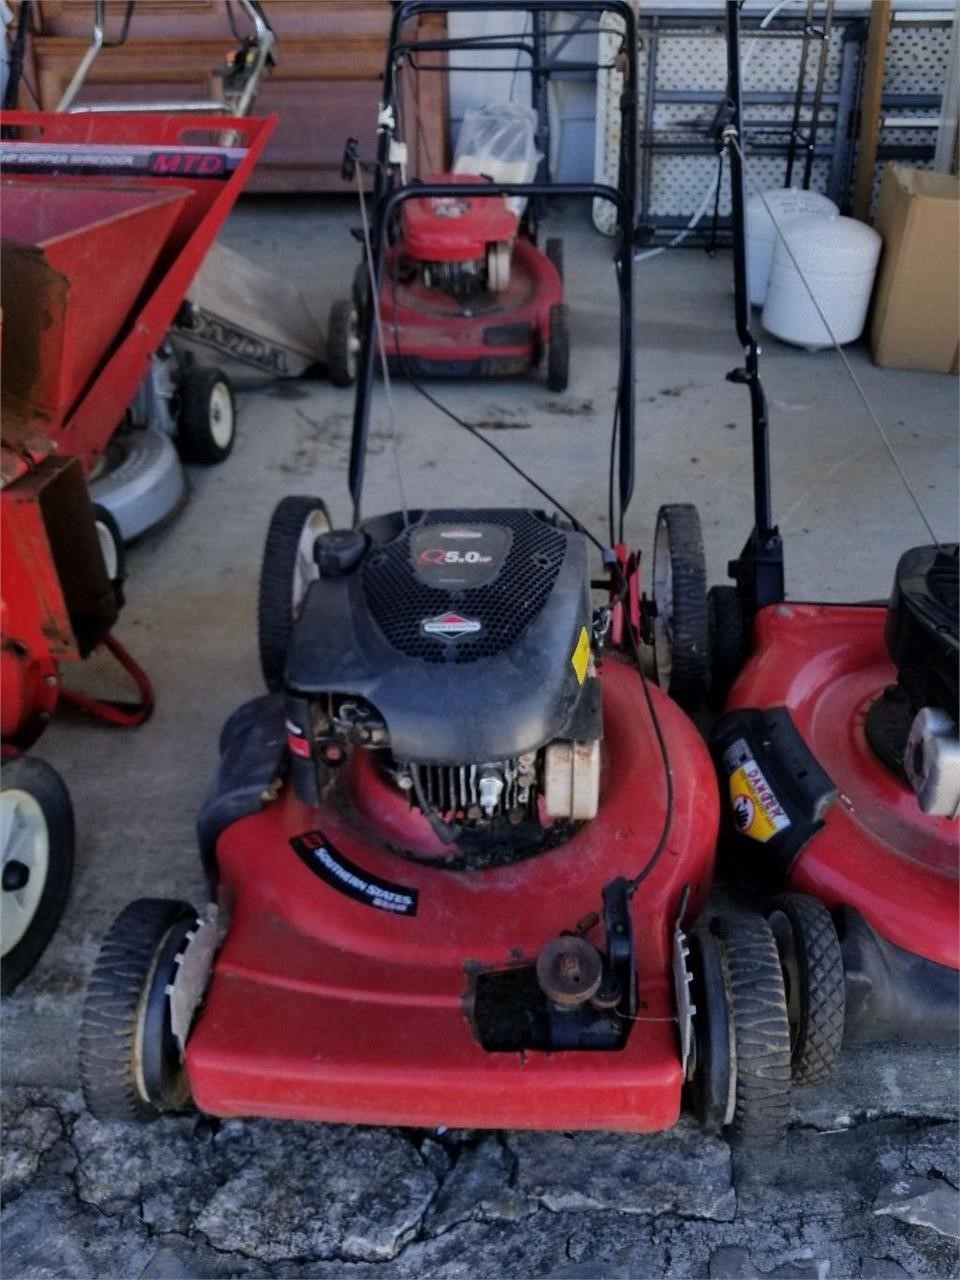 Thursday April 22 - 9:00 AM Tools, washer/dryer, mowers